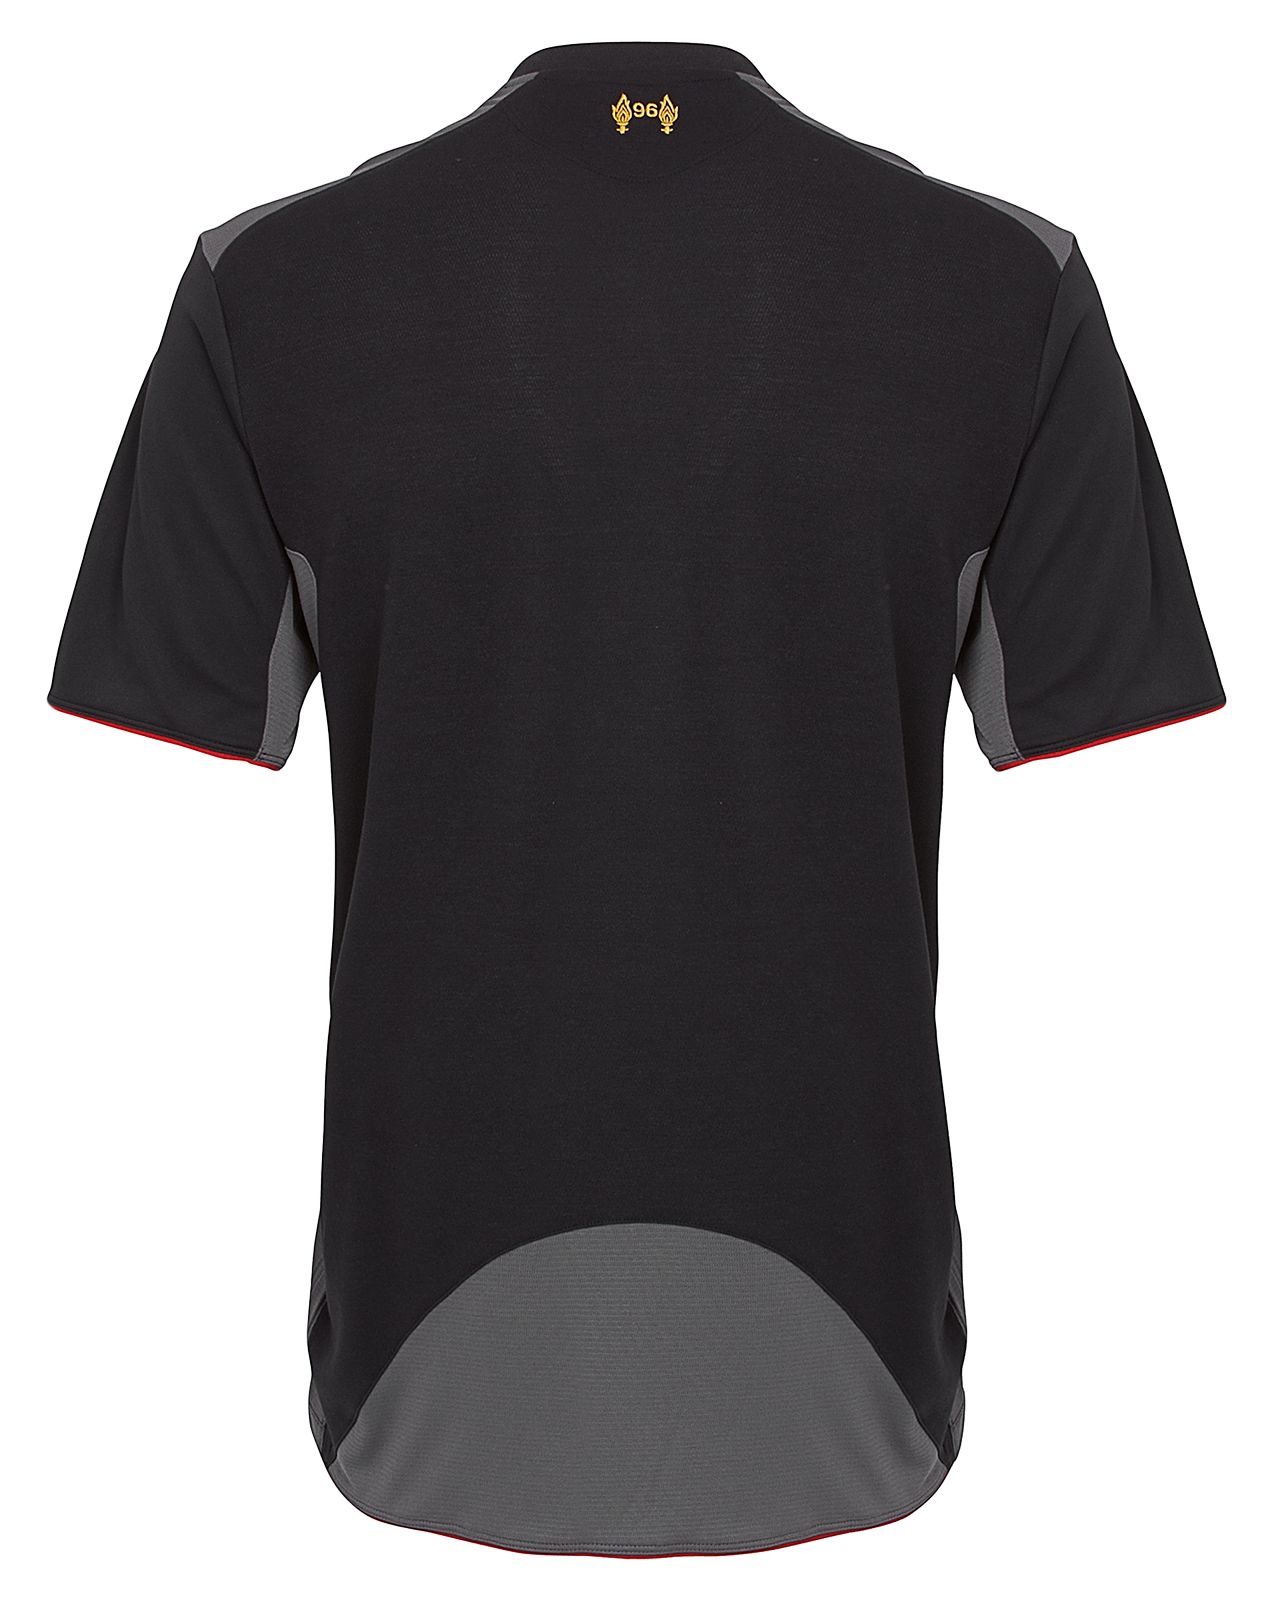 Away Short Sleeve Jersey 2012/13, Black with Raven Grey image number 1